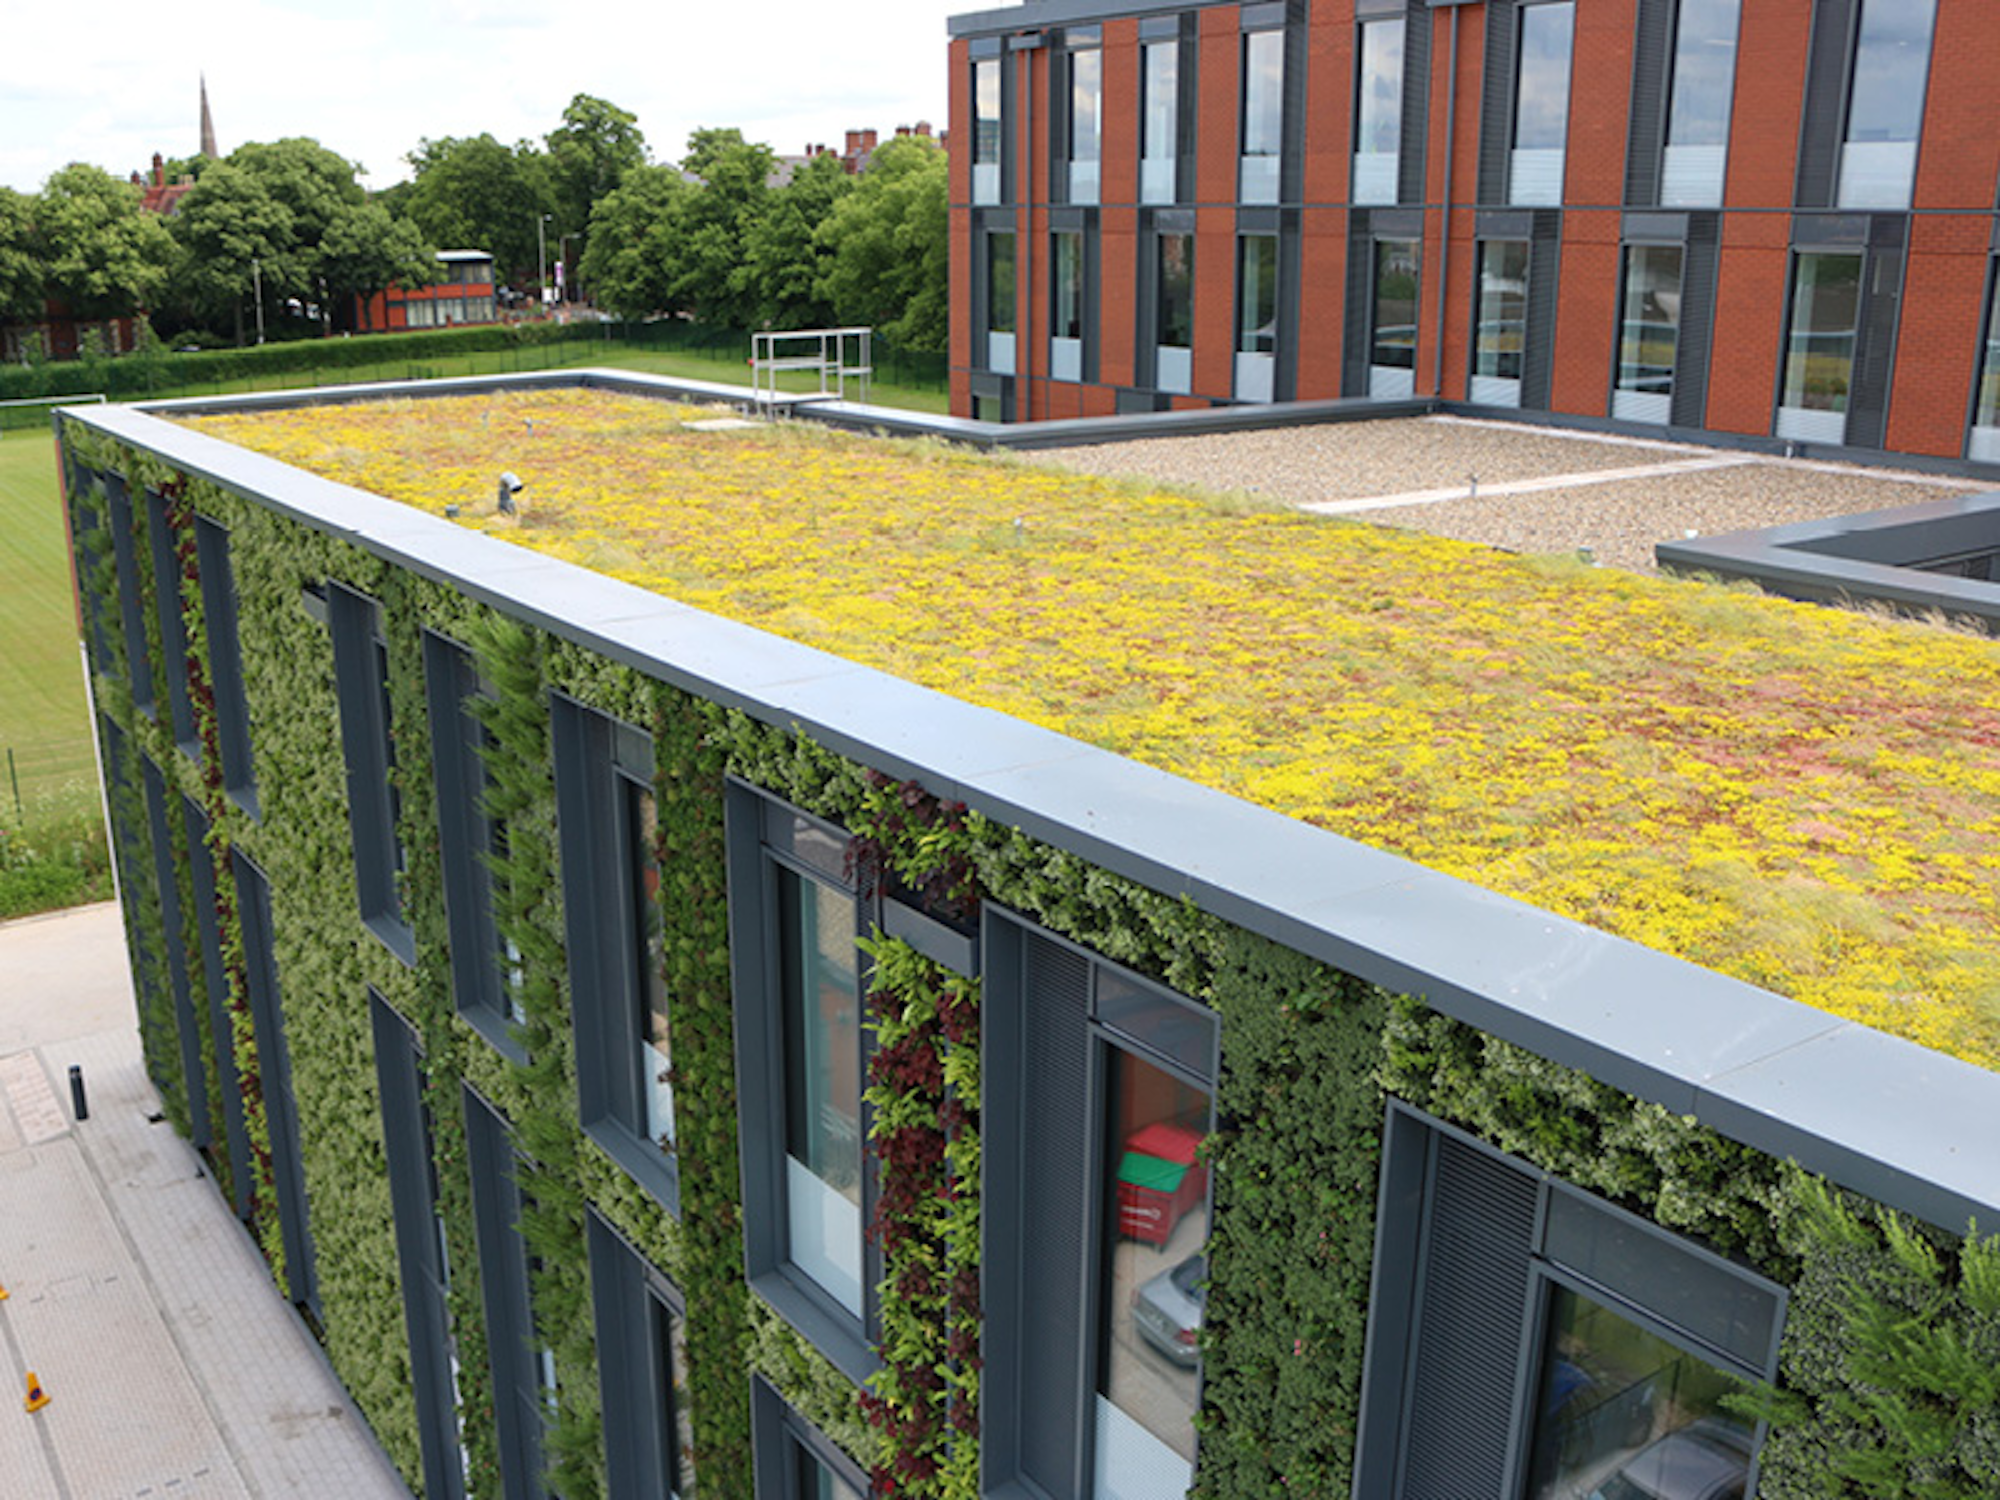 Green roof and living wall on the building